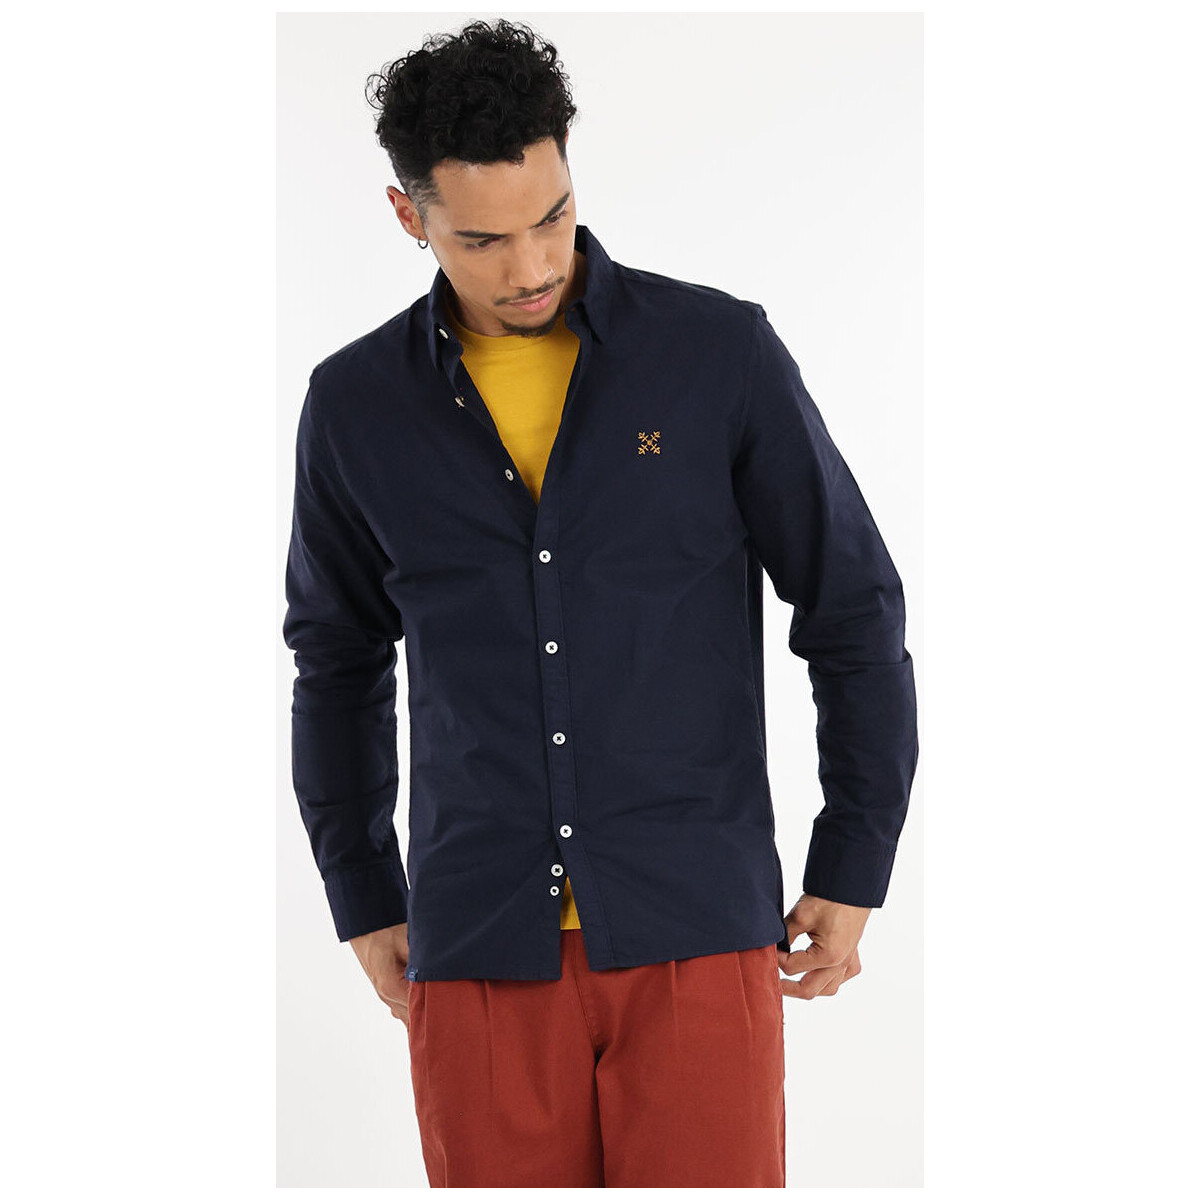 Oxbow Bleu Chemise manches longues Oxford P2CART ZthEhugT